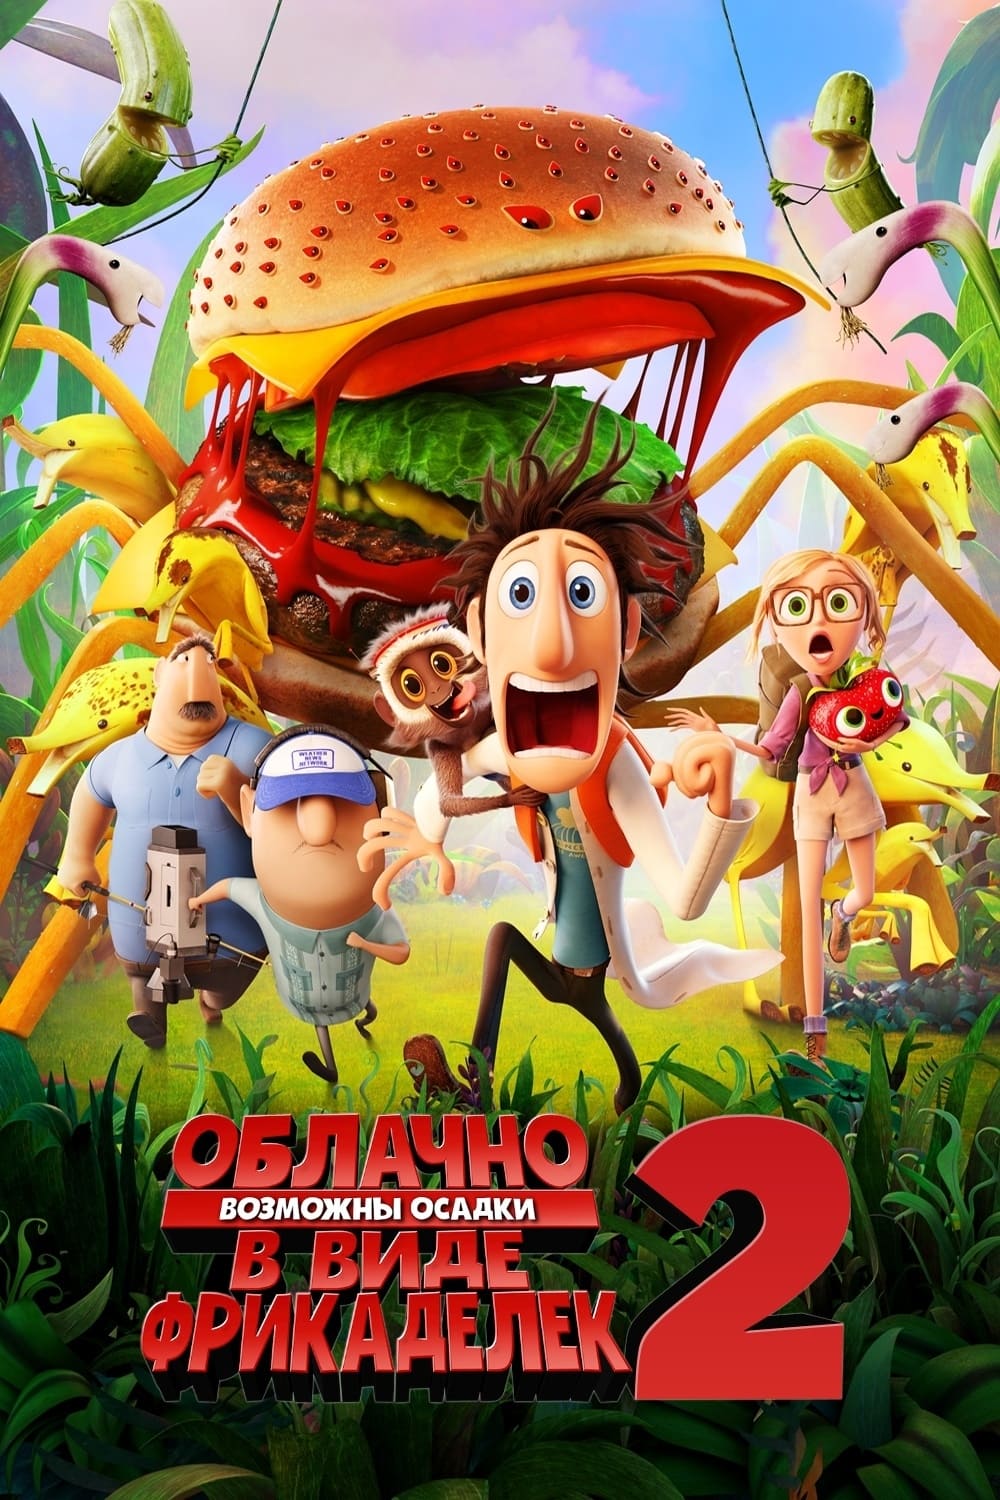 Watch Cloudy with a Chance of Meatballs 2 (2013) Full Movie Online Free - CineFOX - Cloudy With A Chance Of Meatballs 2 Full Movie Free